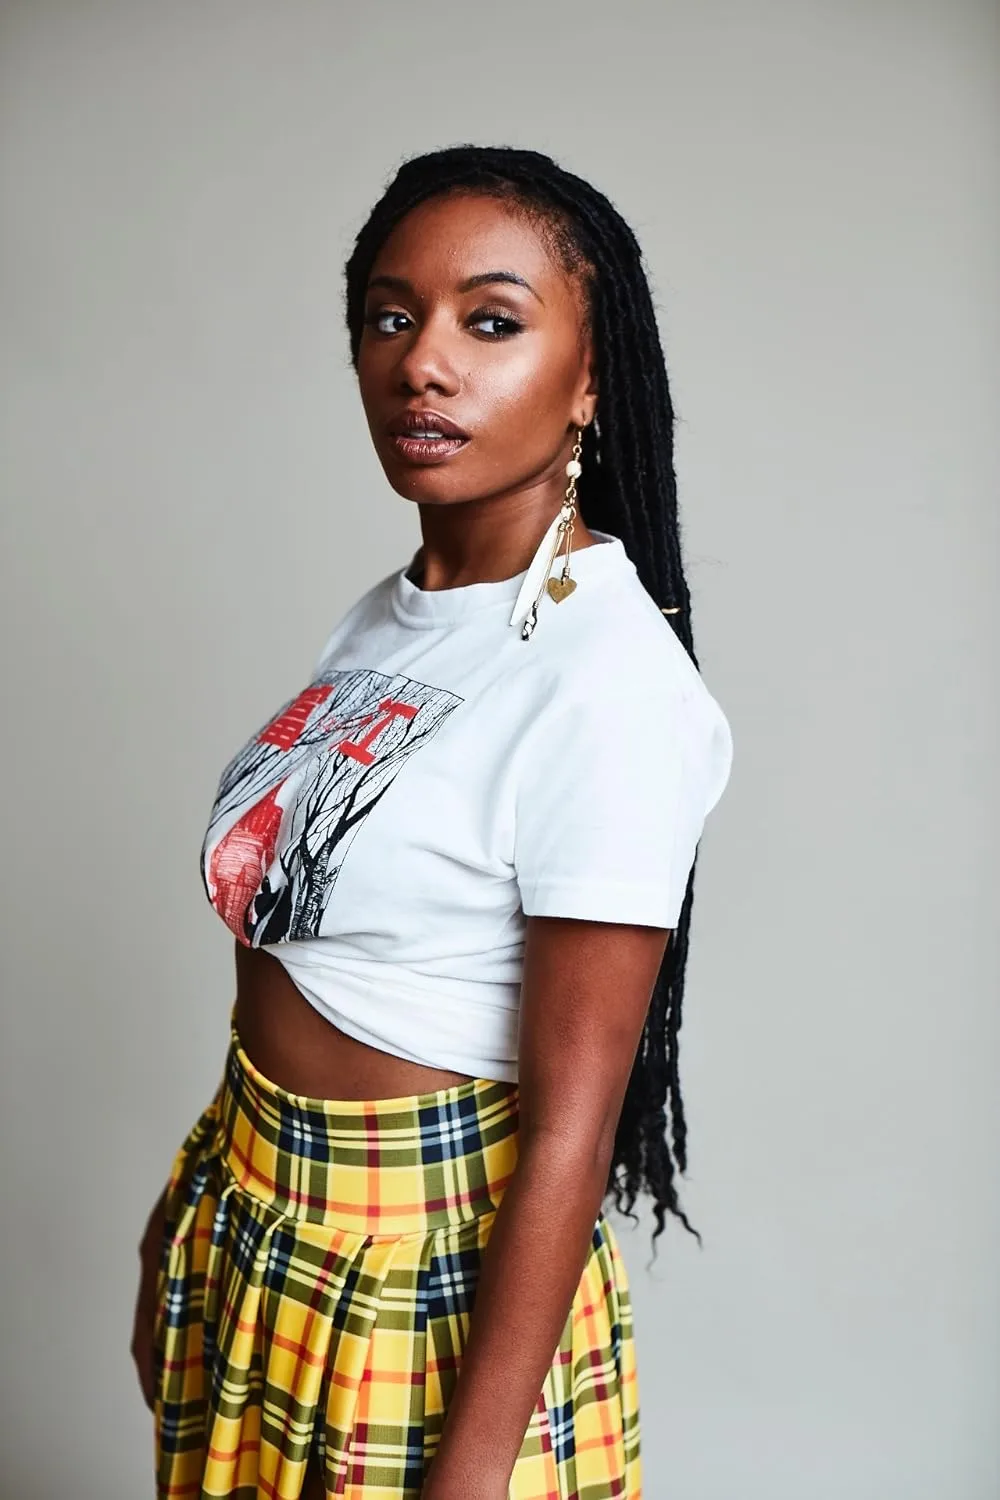 Who Is Imani Hakim? Age, Bio, Career And More Of The Actress